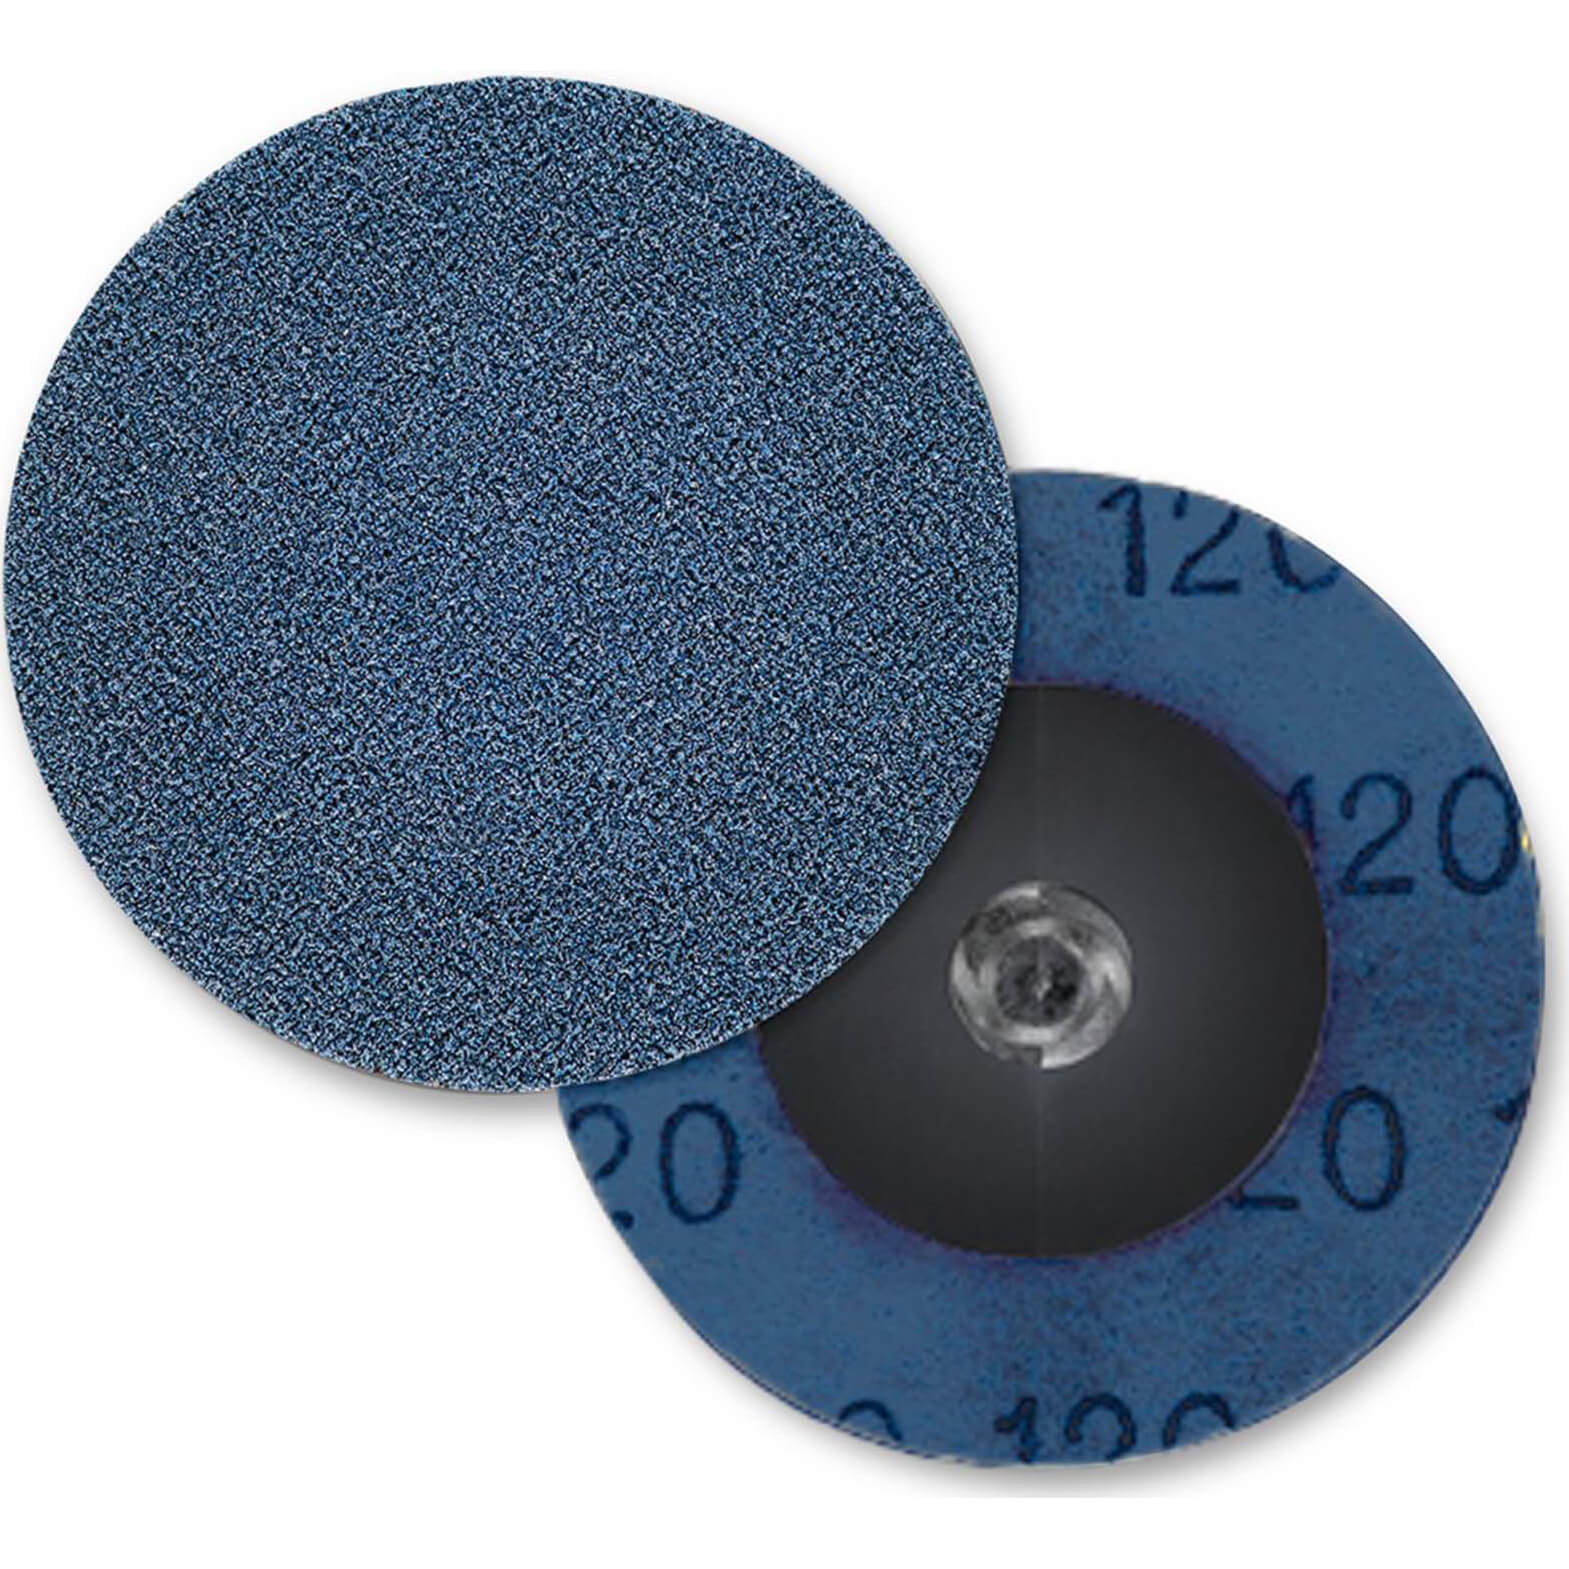 Image of Sia 2820 Siamet X Quick Change Abrasives Discs 50mm 60g Pack of 1